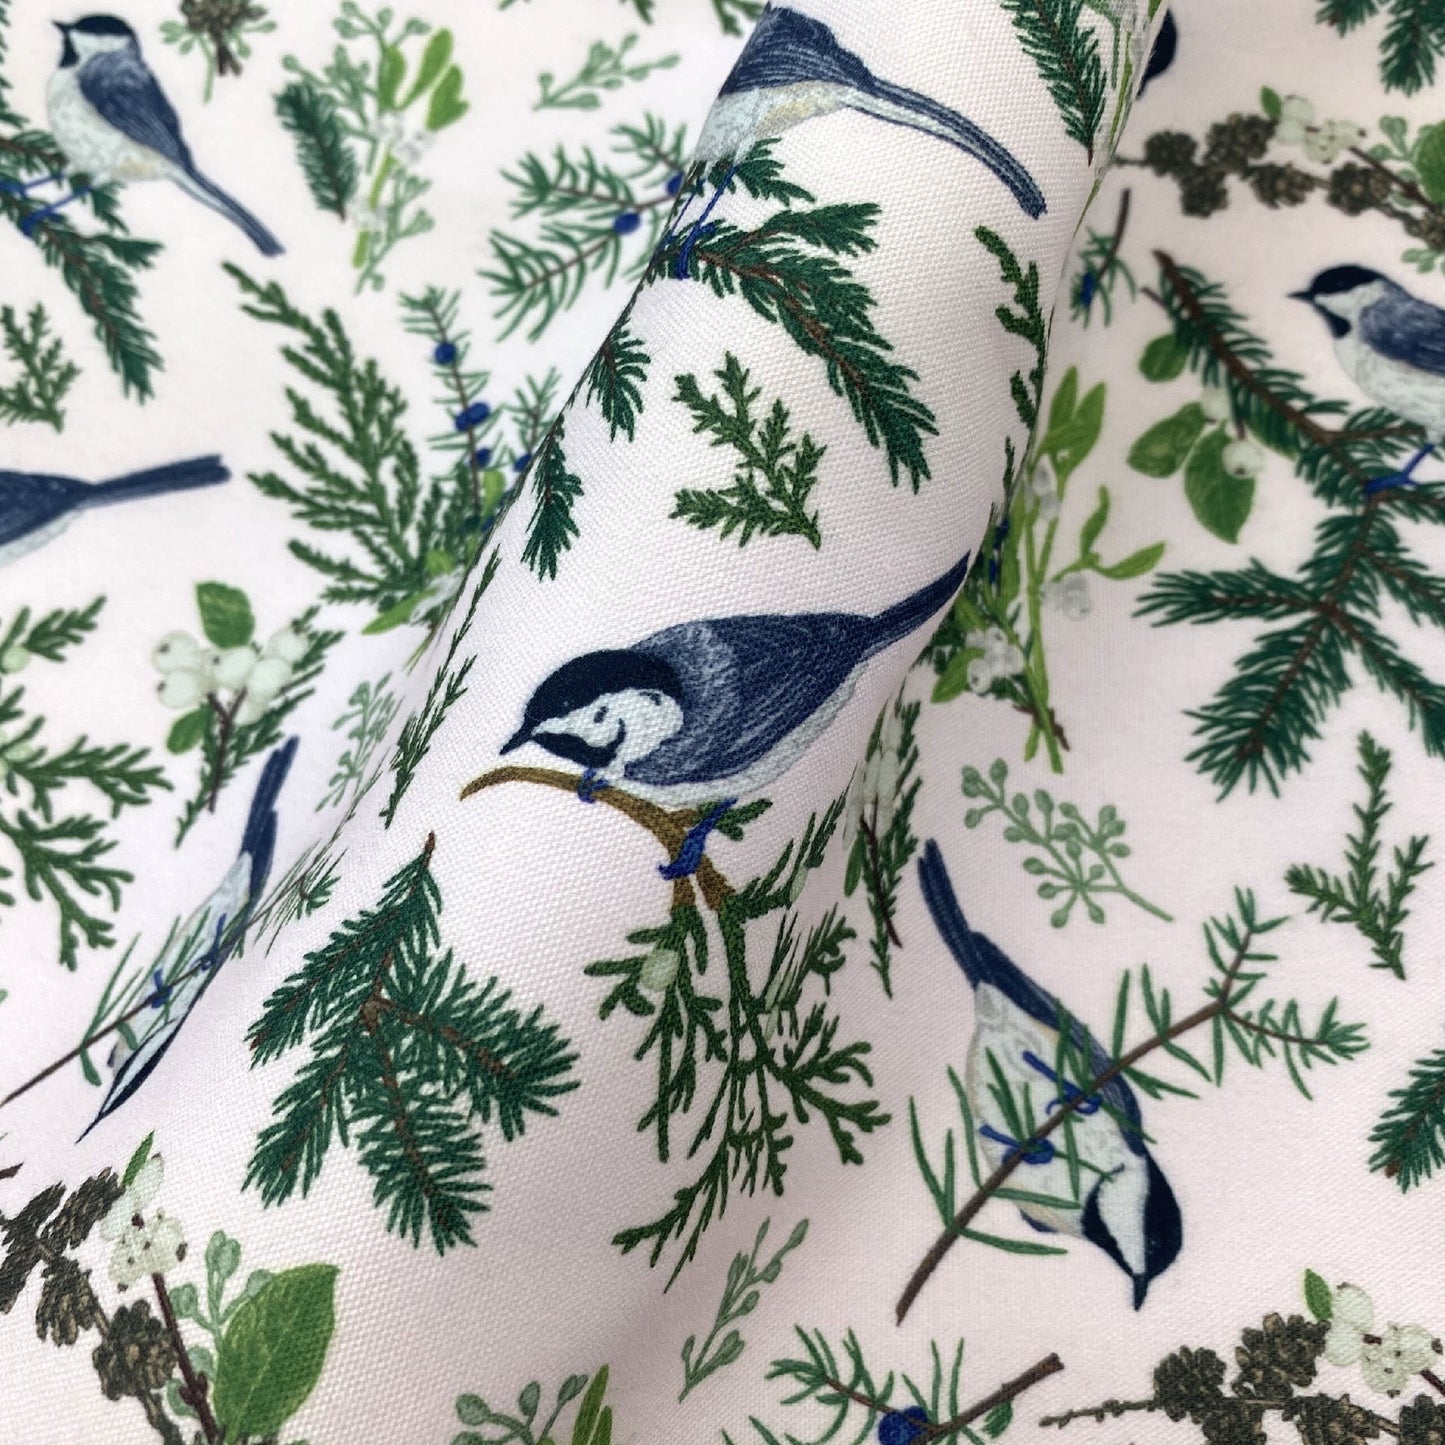 Set of 4 titmouse bird placemat, Vintage floral, spruce, snow berry and titmouse birds pattern, washable Placemat for dining table